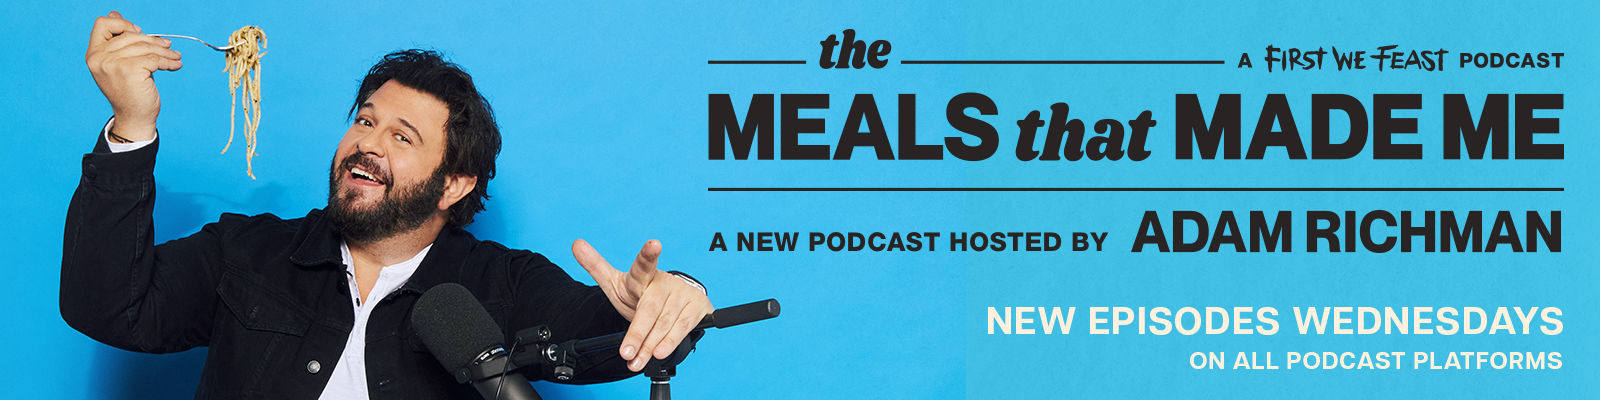 The Meals That Made Me Podcast